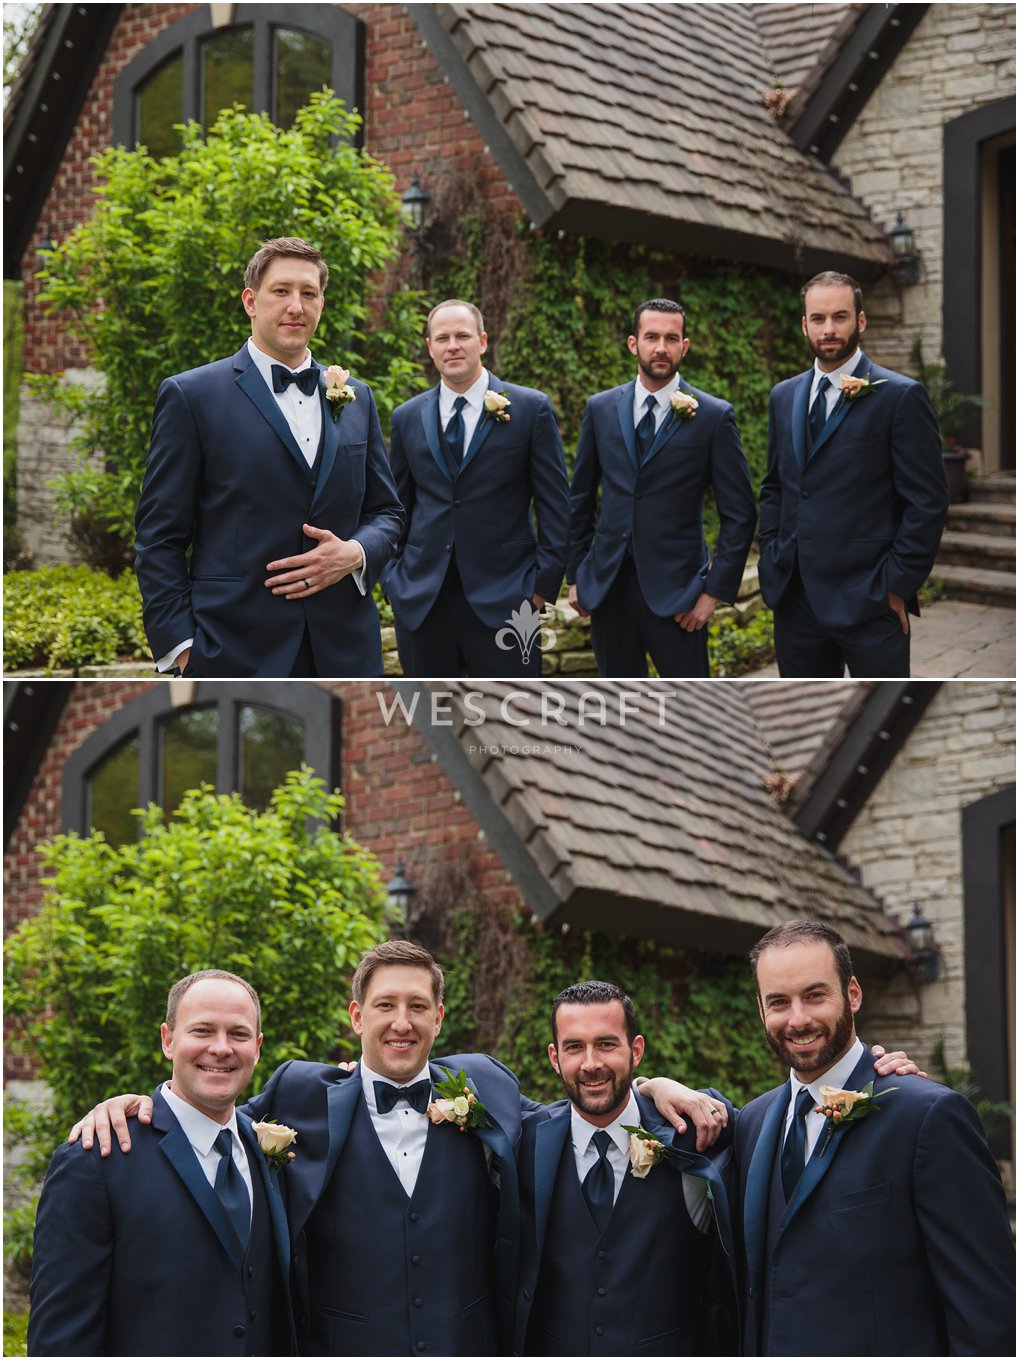 The groomsmen were truly a band of brothers.